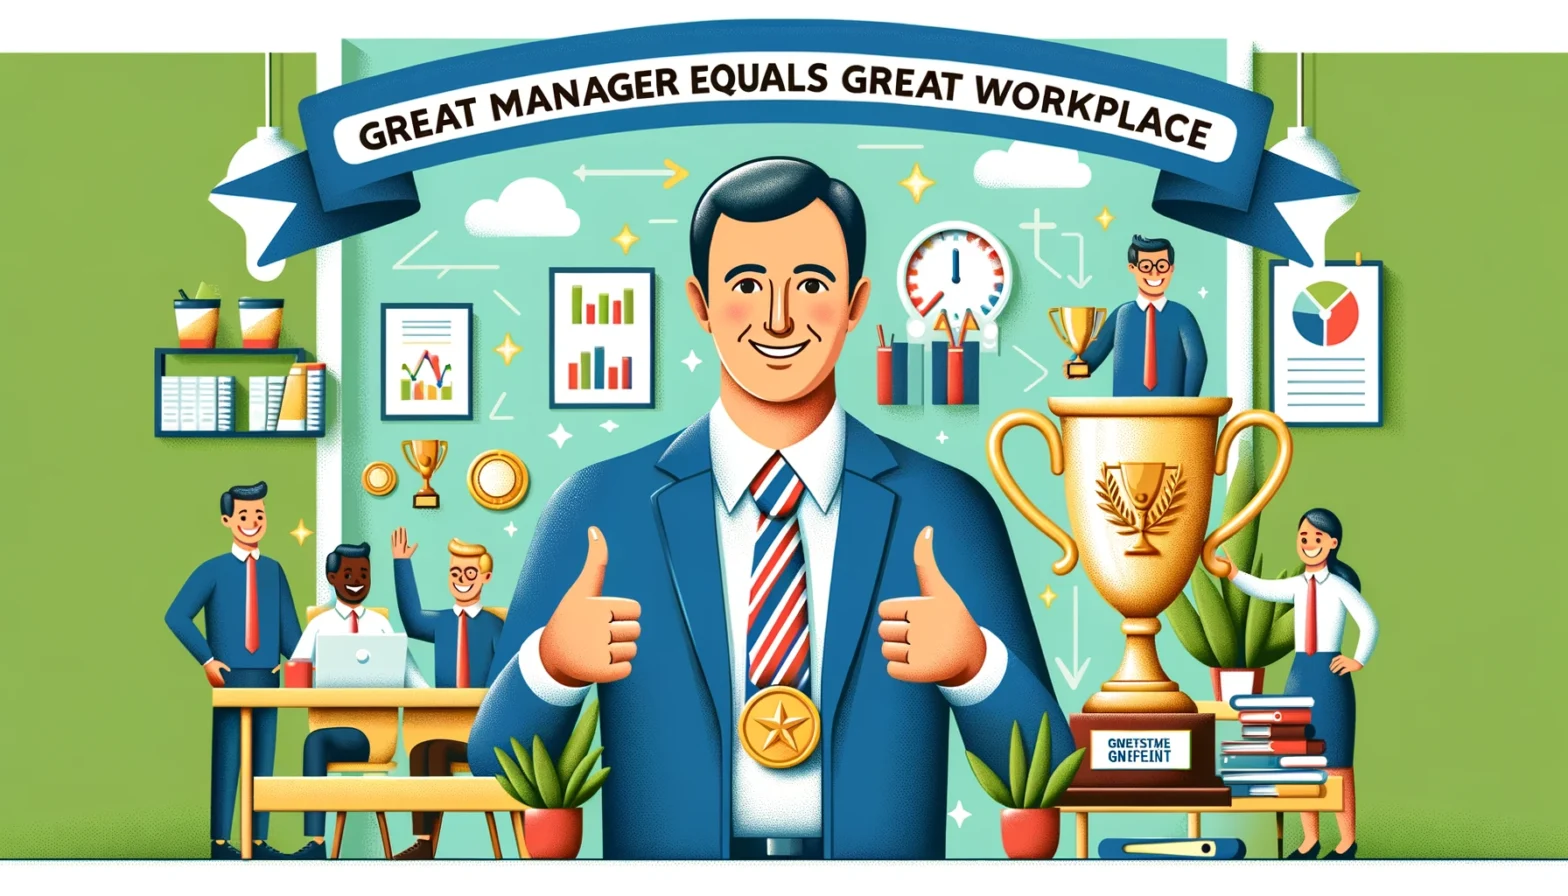 Great managers = Great workplaces?